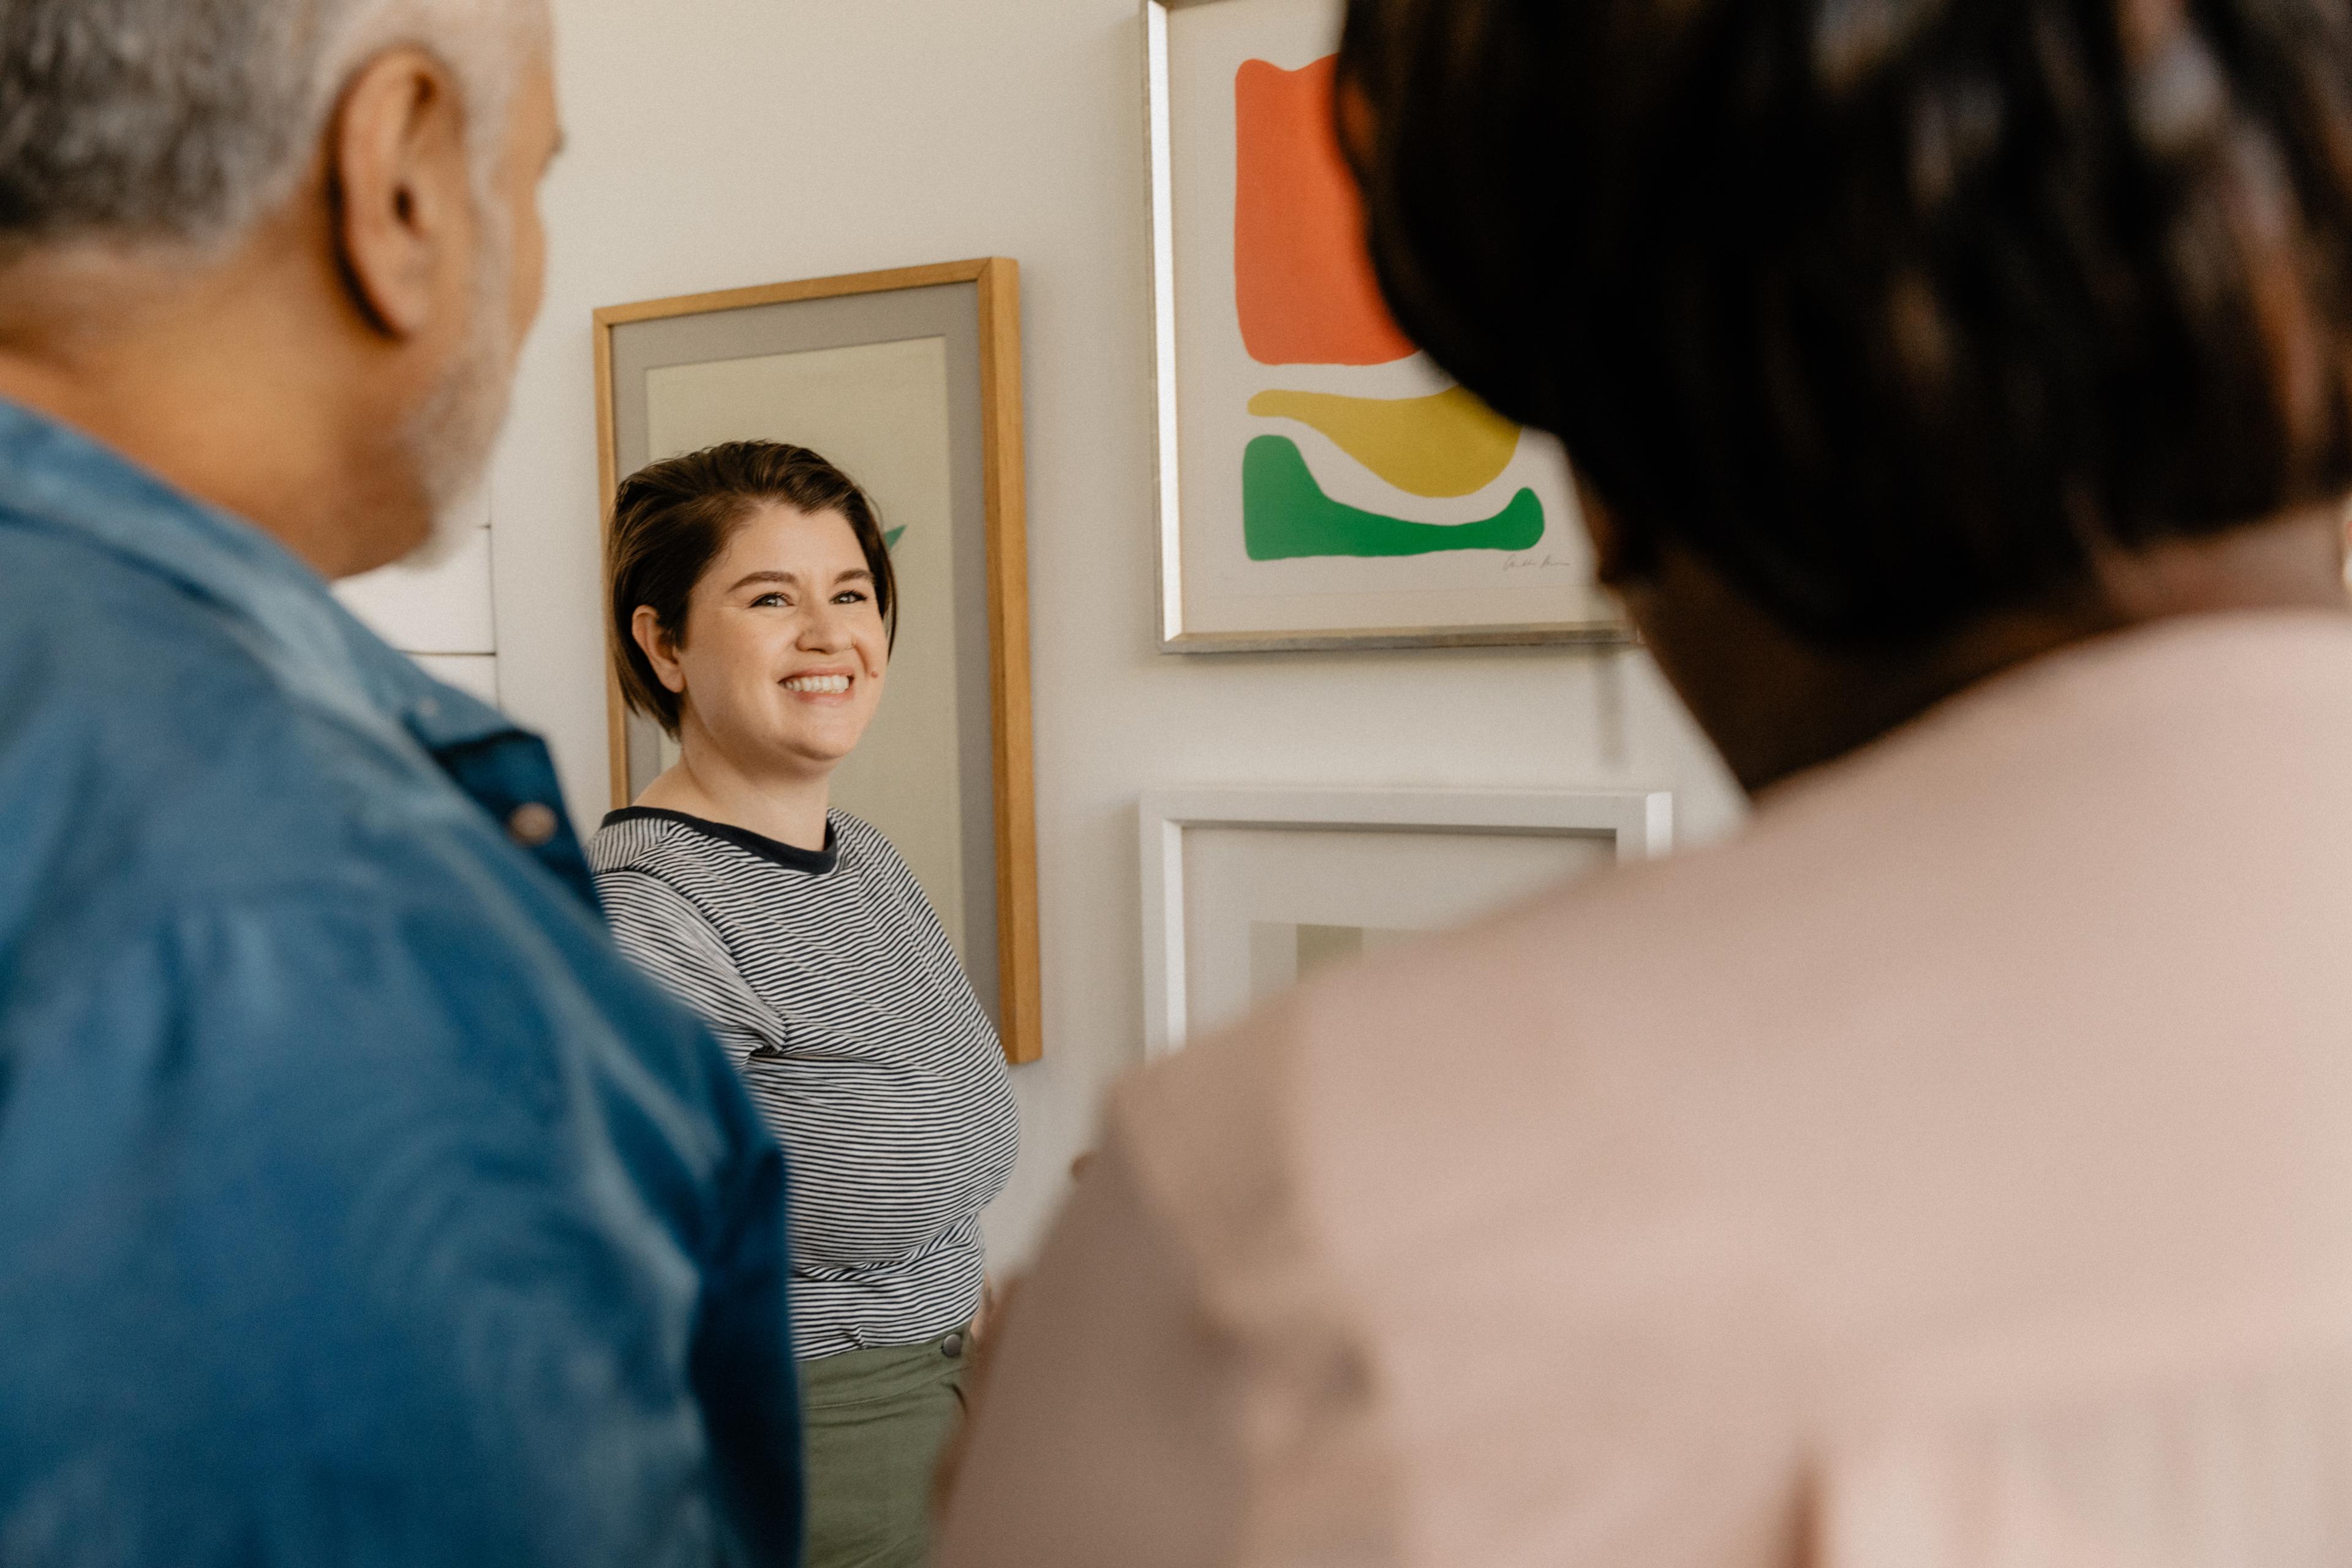 Lady smiling at a family in a room